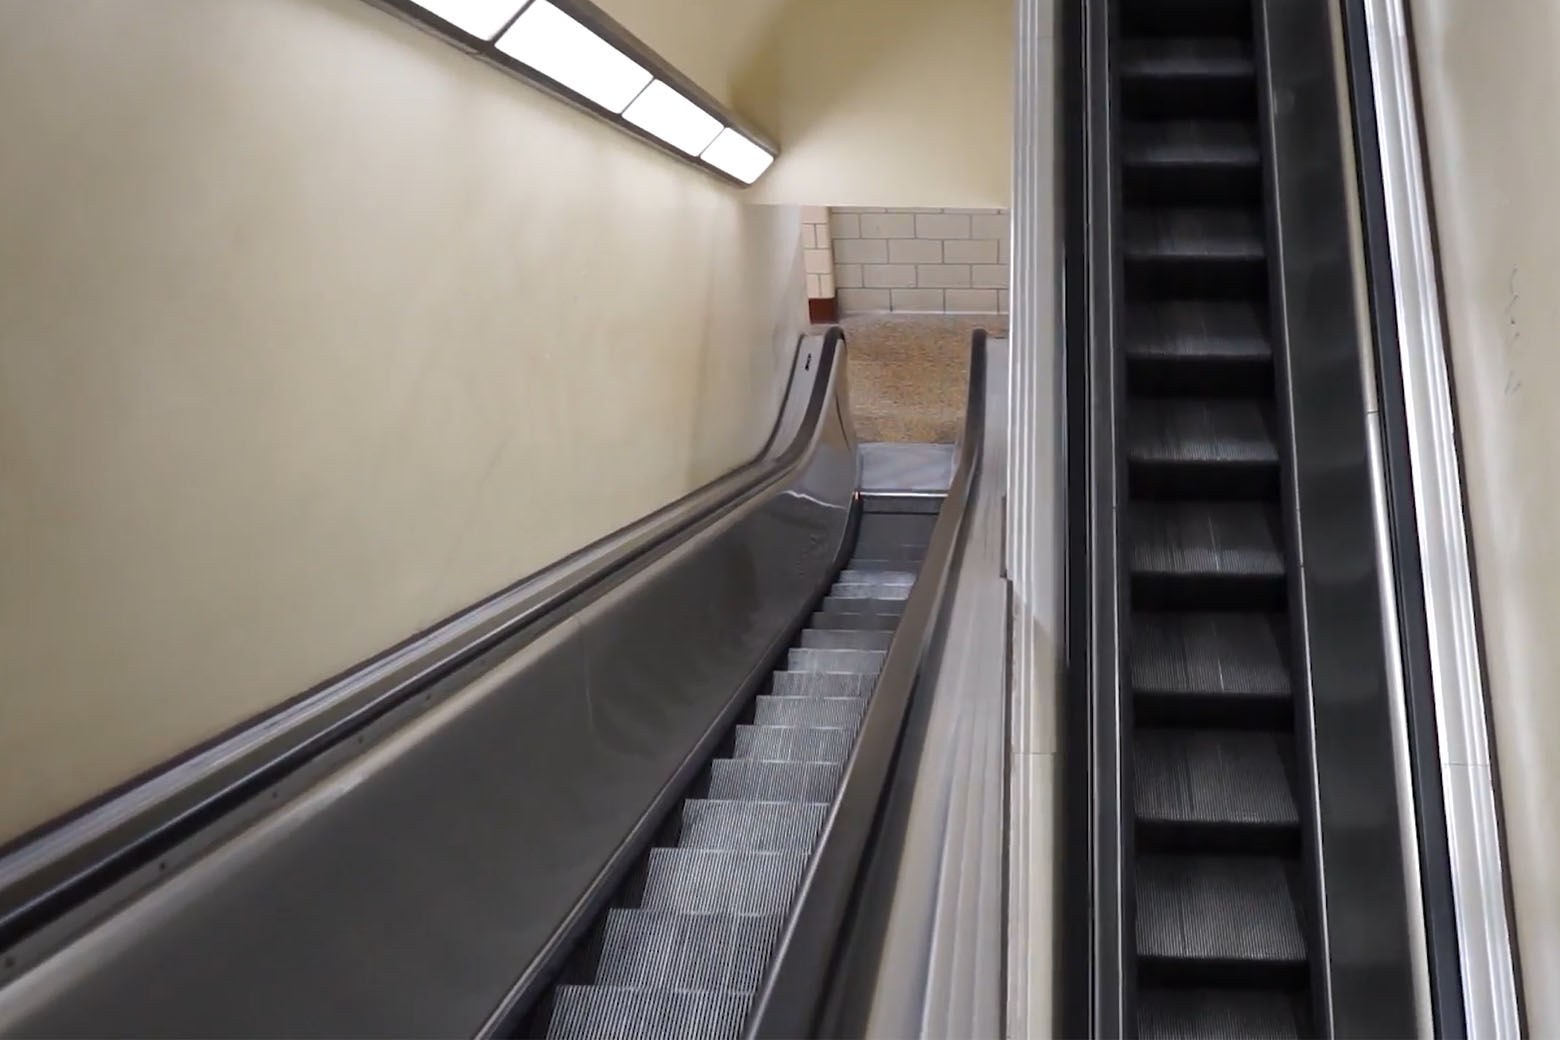 The $12 million renovations include replacing escalators that date back to 1961. (Courtesy MDOT MVA)